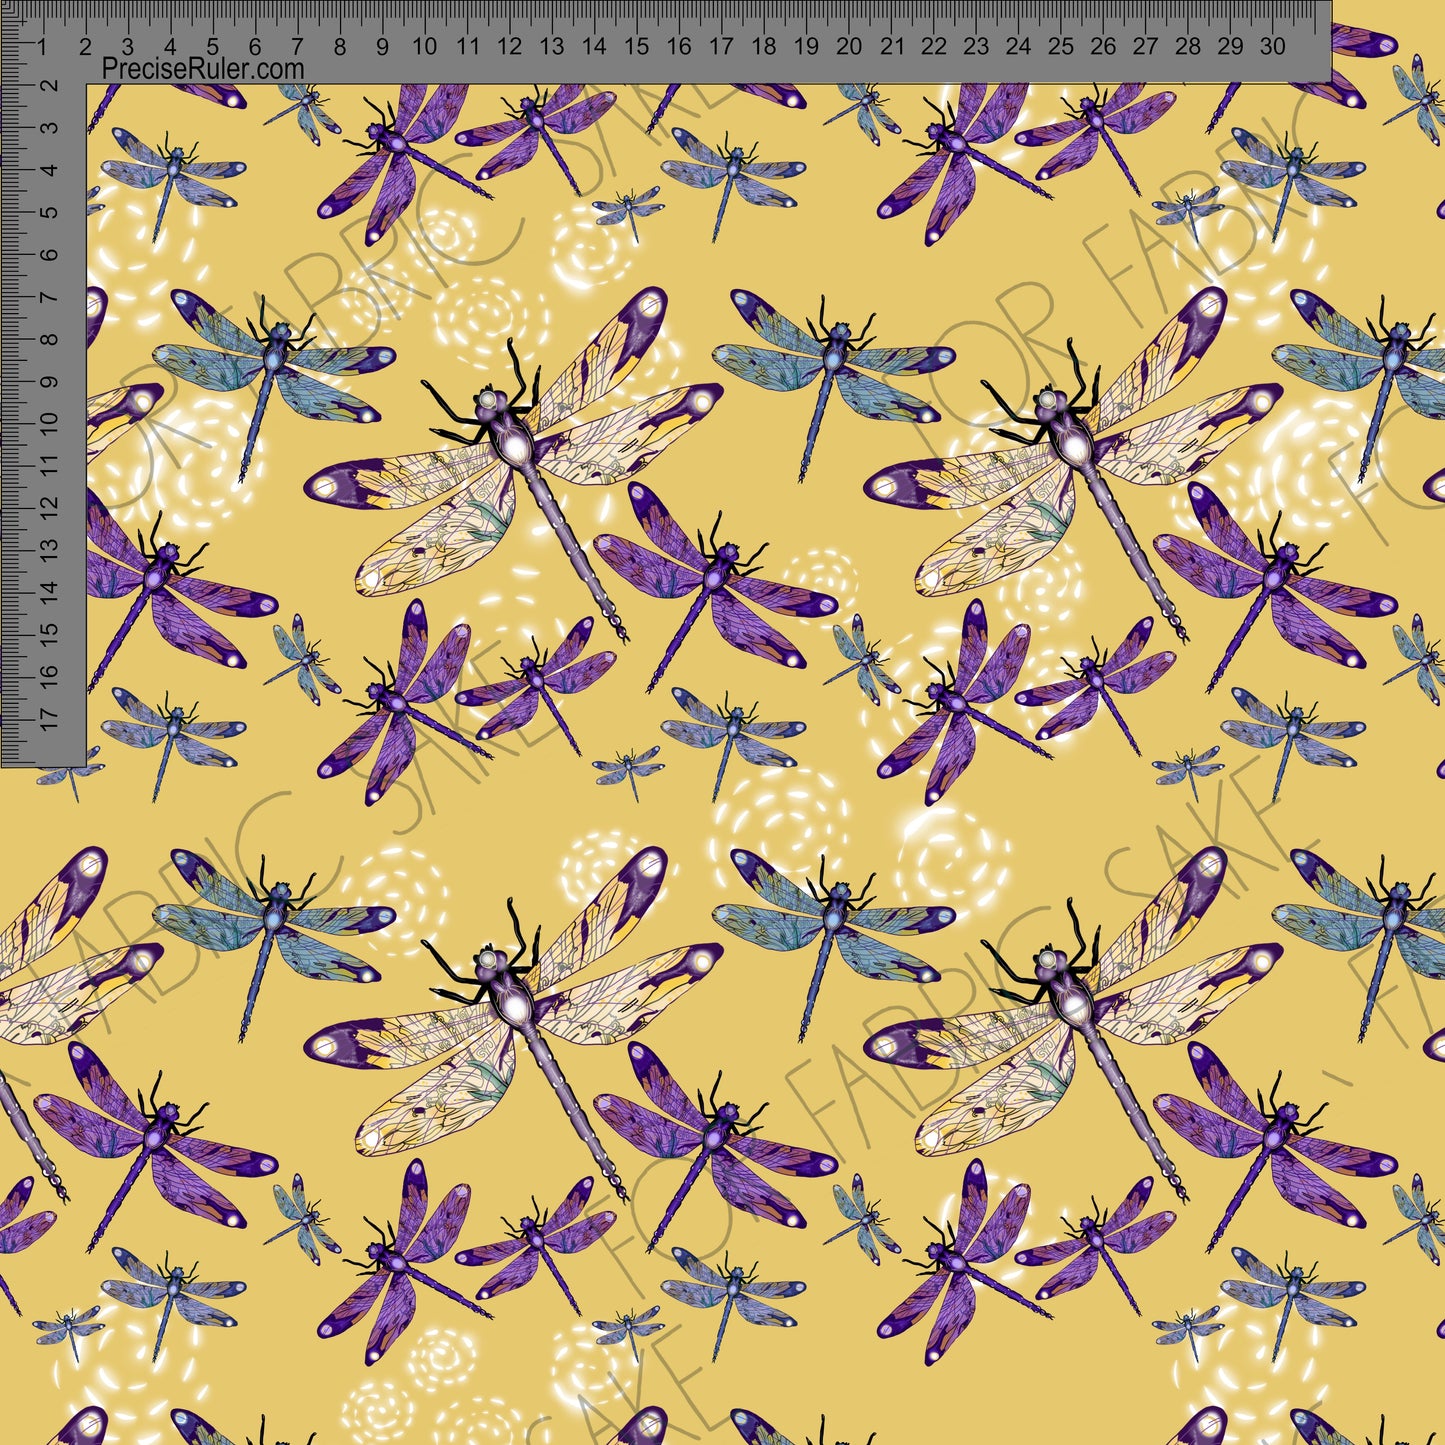 Load image into Gallery viewer, Dragonfly with swirls on mustard - Sarah McAlpine Art- Custom Pre Order
